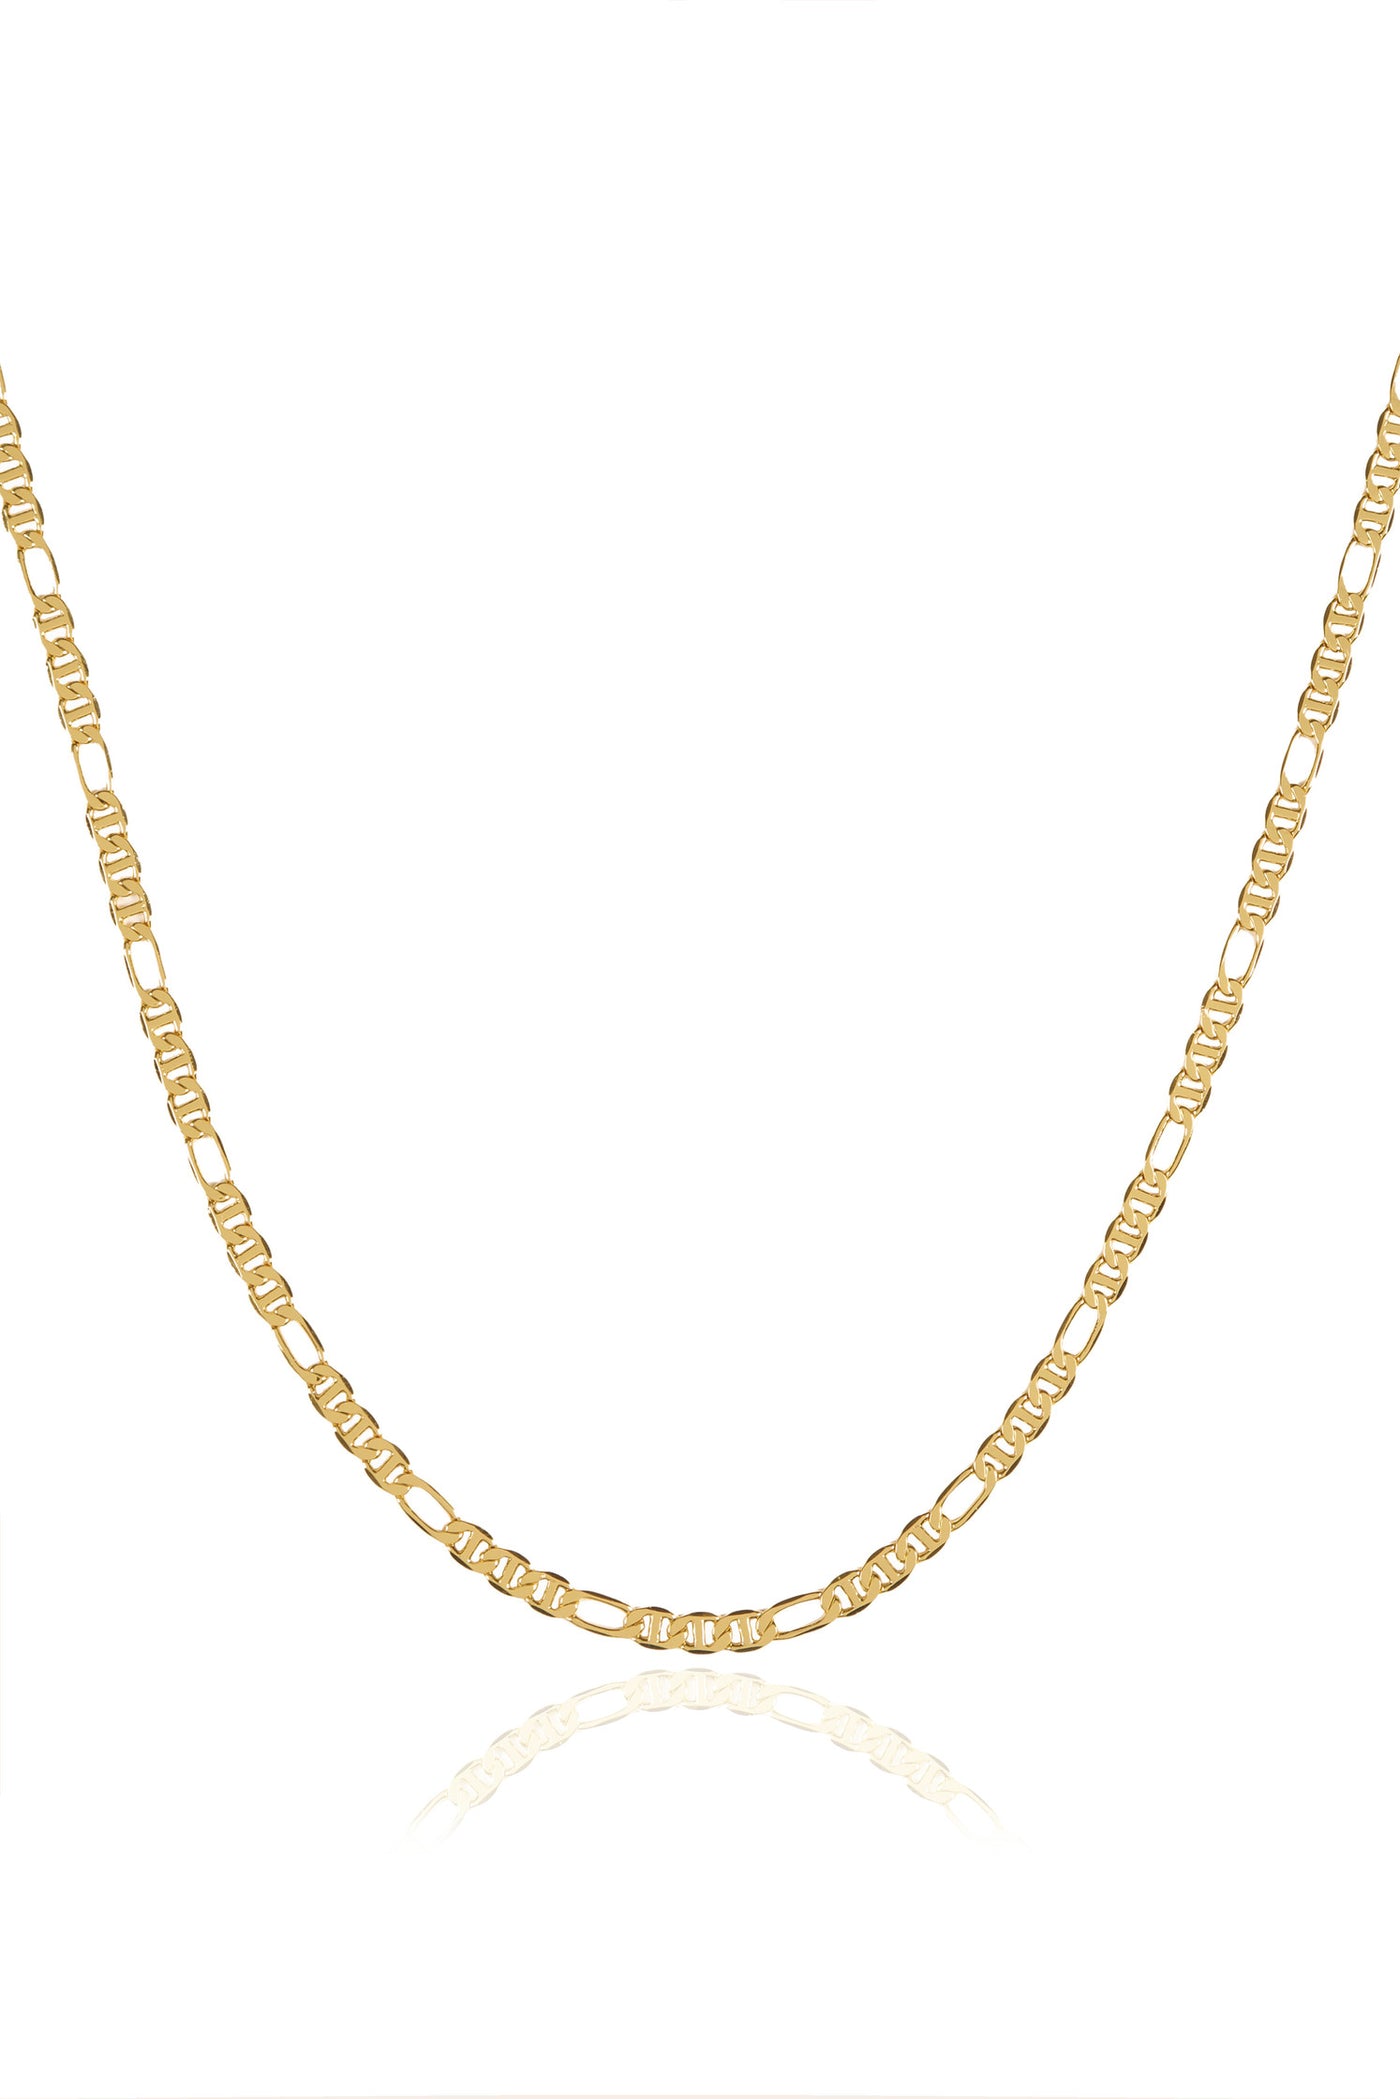 ANCHOR CHAIN NECKLACE GOLD TITS